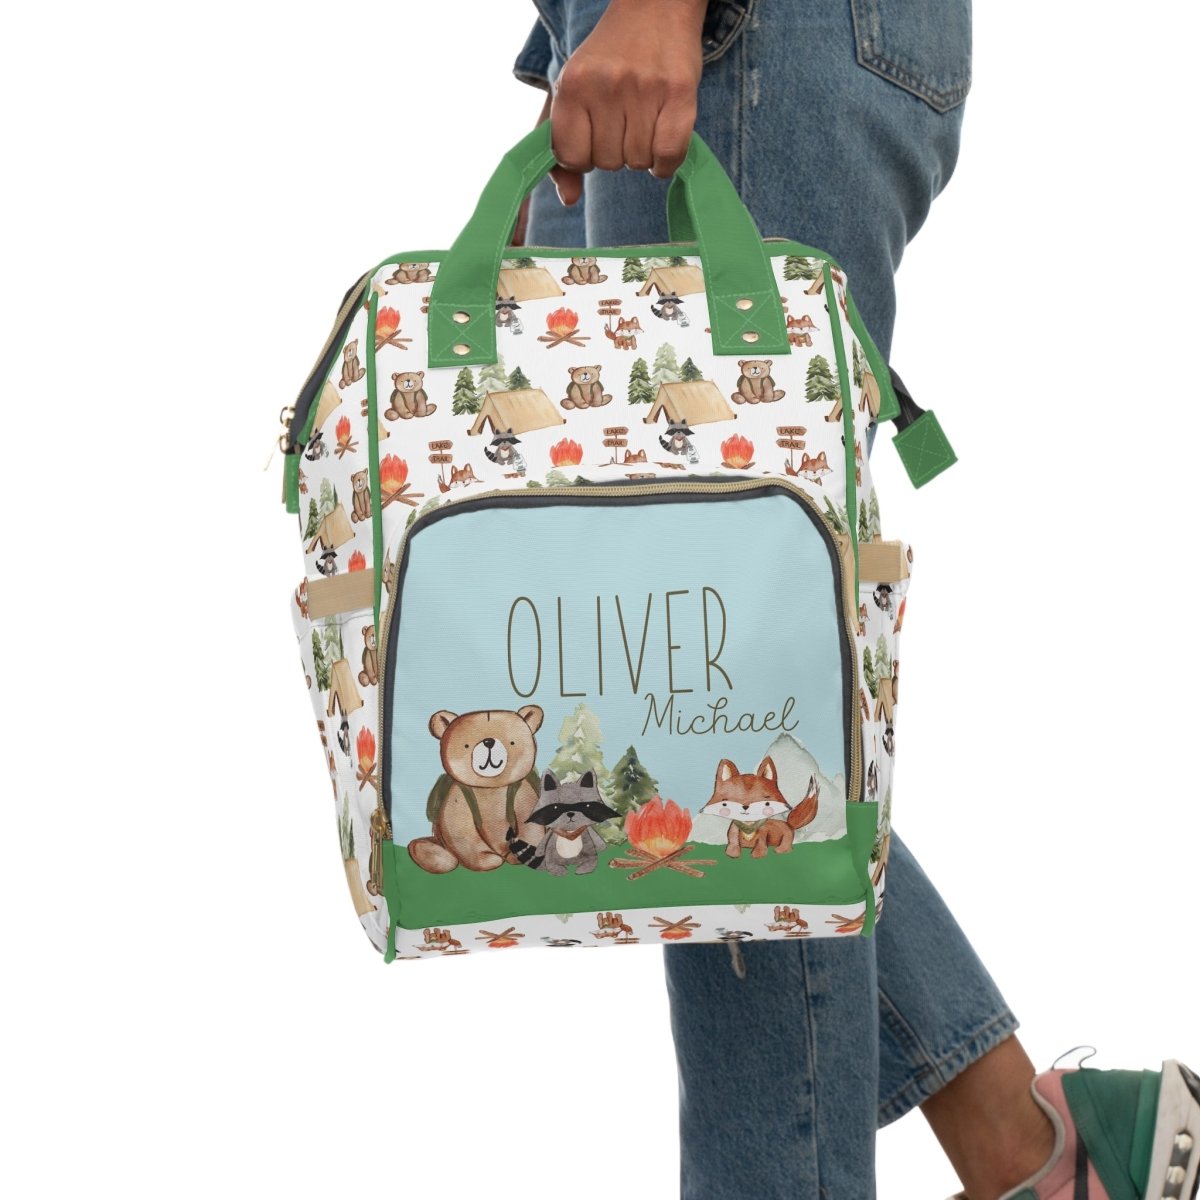 Woodland Camper Personalized Backpack Diaper Bag - gender_boy, text, Theme_Woodland